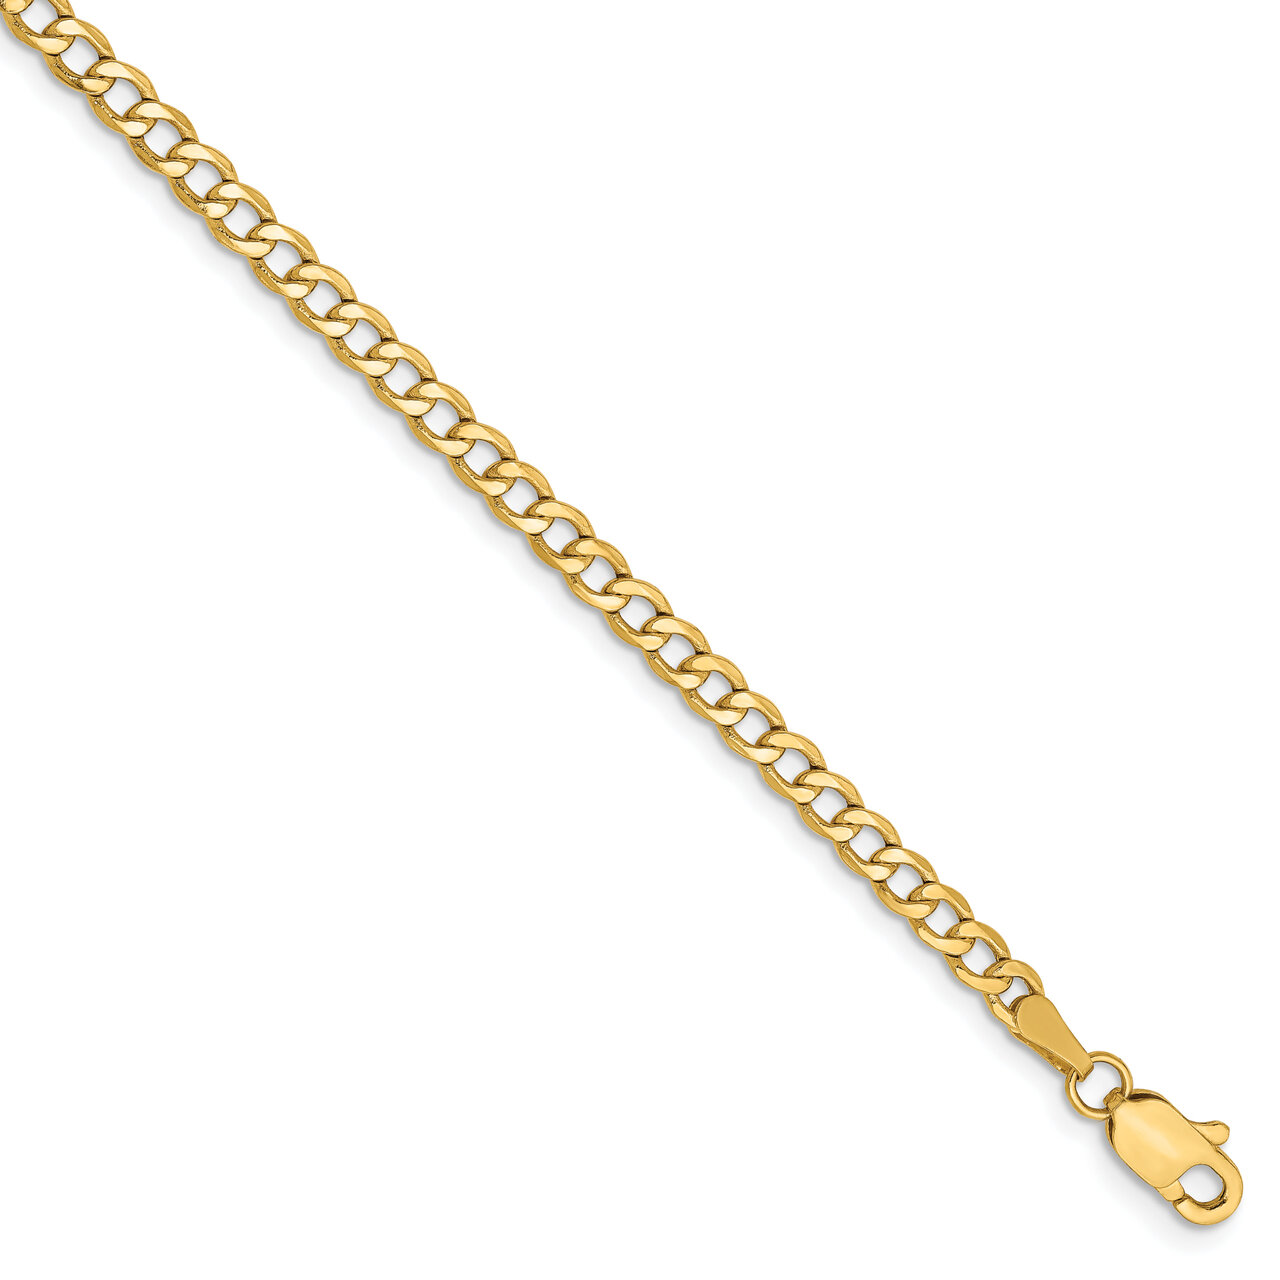 7 Inch 2.85mm Semi-Solid Curb Link Chain 14k Yellow Gold BC192-7